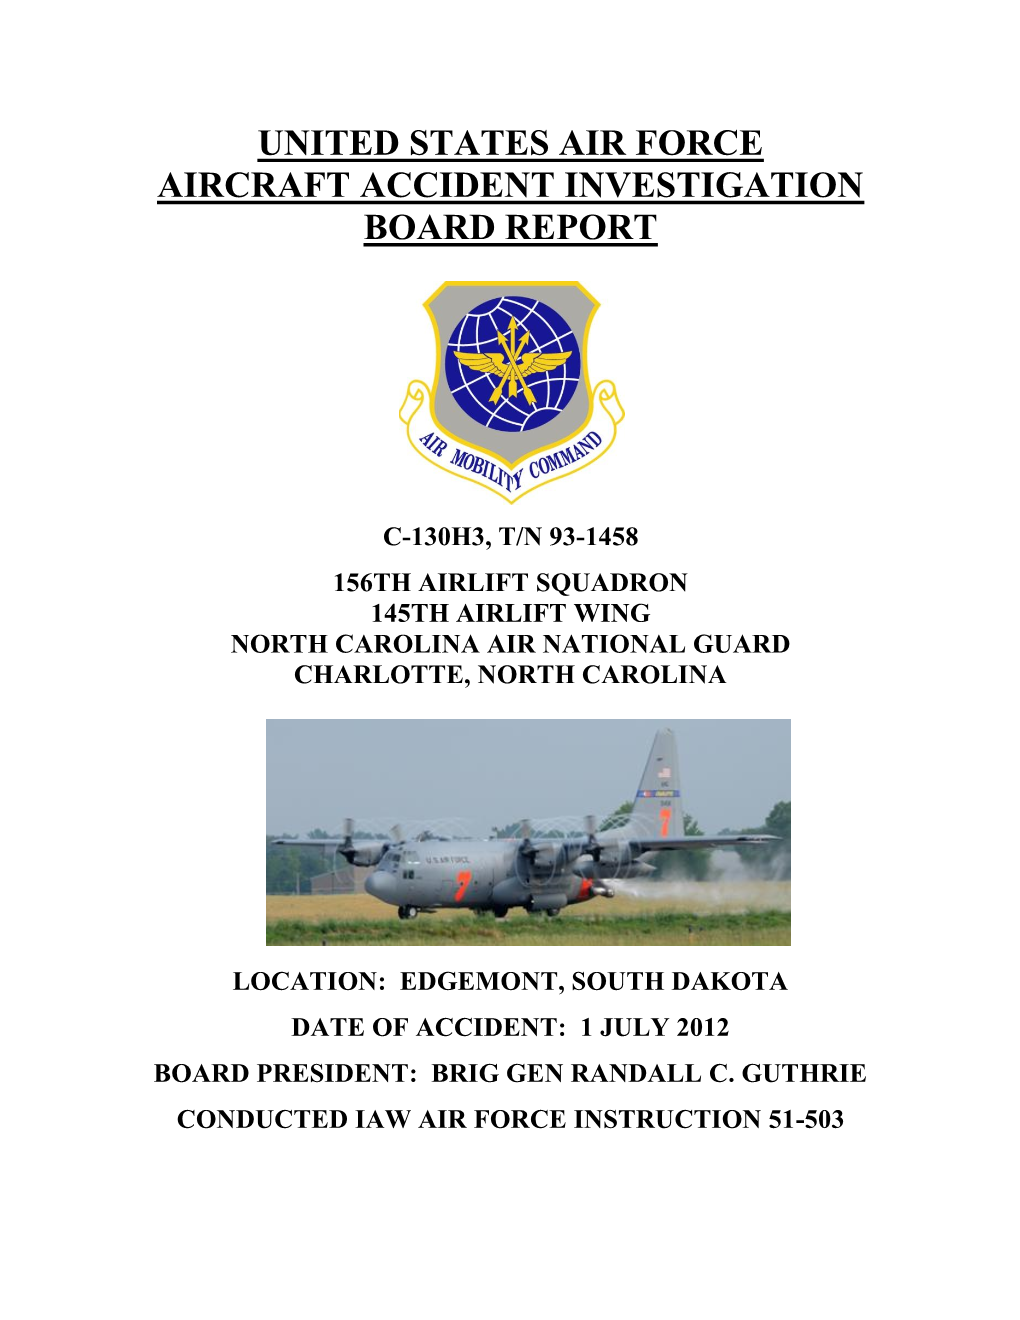 United States Air Force Aircraft Accident Investigation Board Report